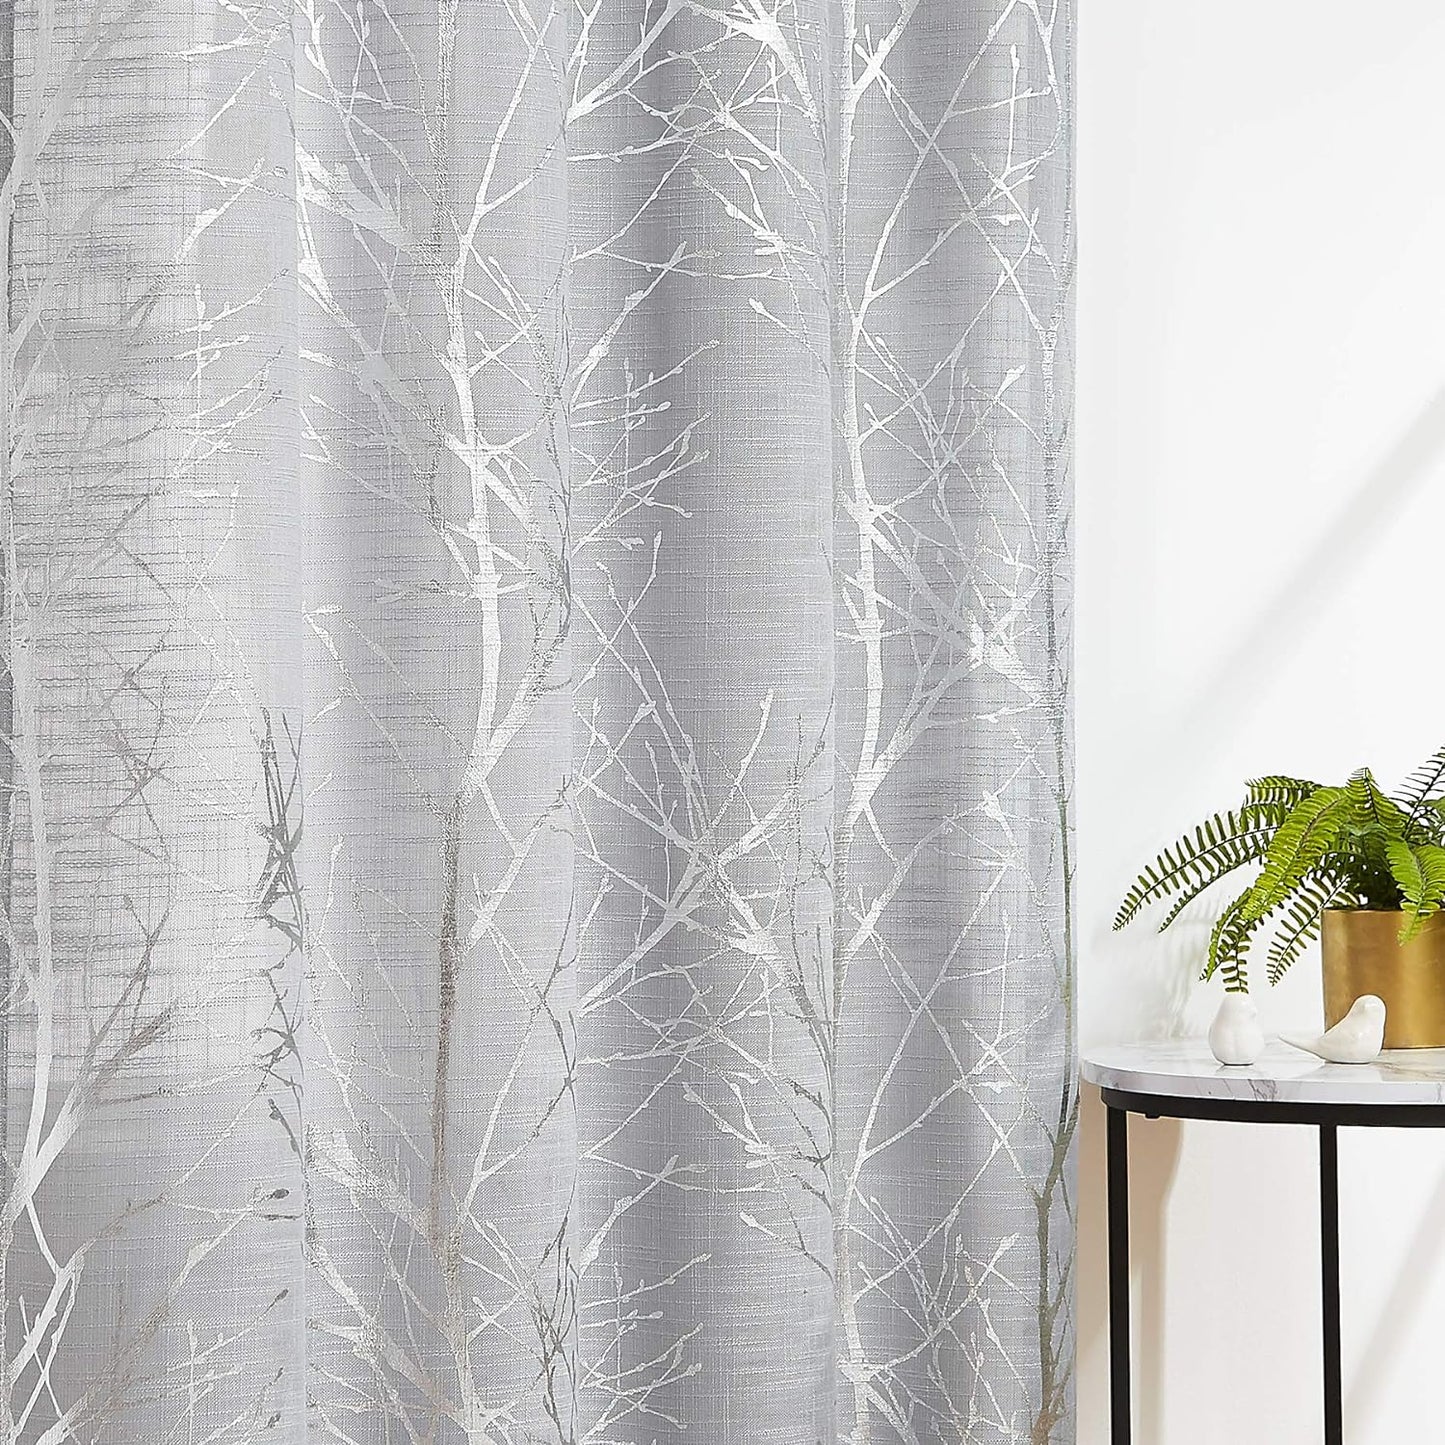 FMFUNCTEX Blue White Curtains for Kitchen Living Room 72“ Grey Tree Branches Print Curtain Set for Small Windows Linen Textured Semi-Sheer Drapes for Bedroom Grommet Top, 2 Panels  Fmfunctex Semi-Sheer: Grey + Foil Silver 50" X 63" |2Pcs 